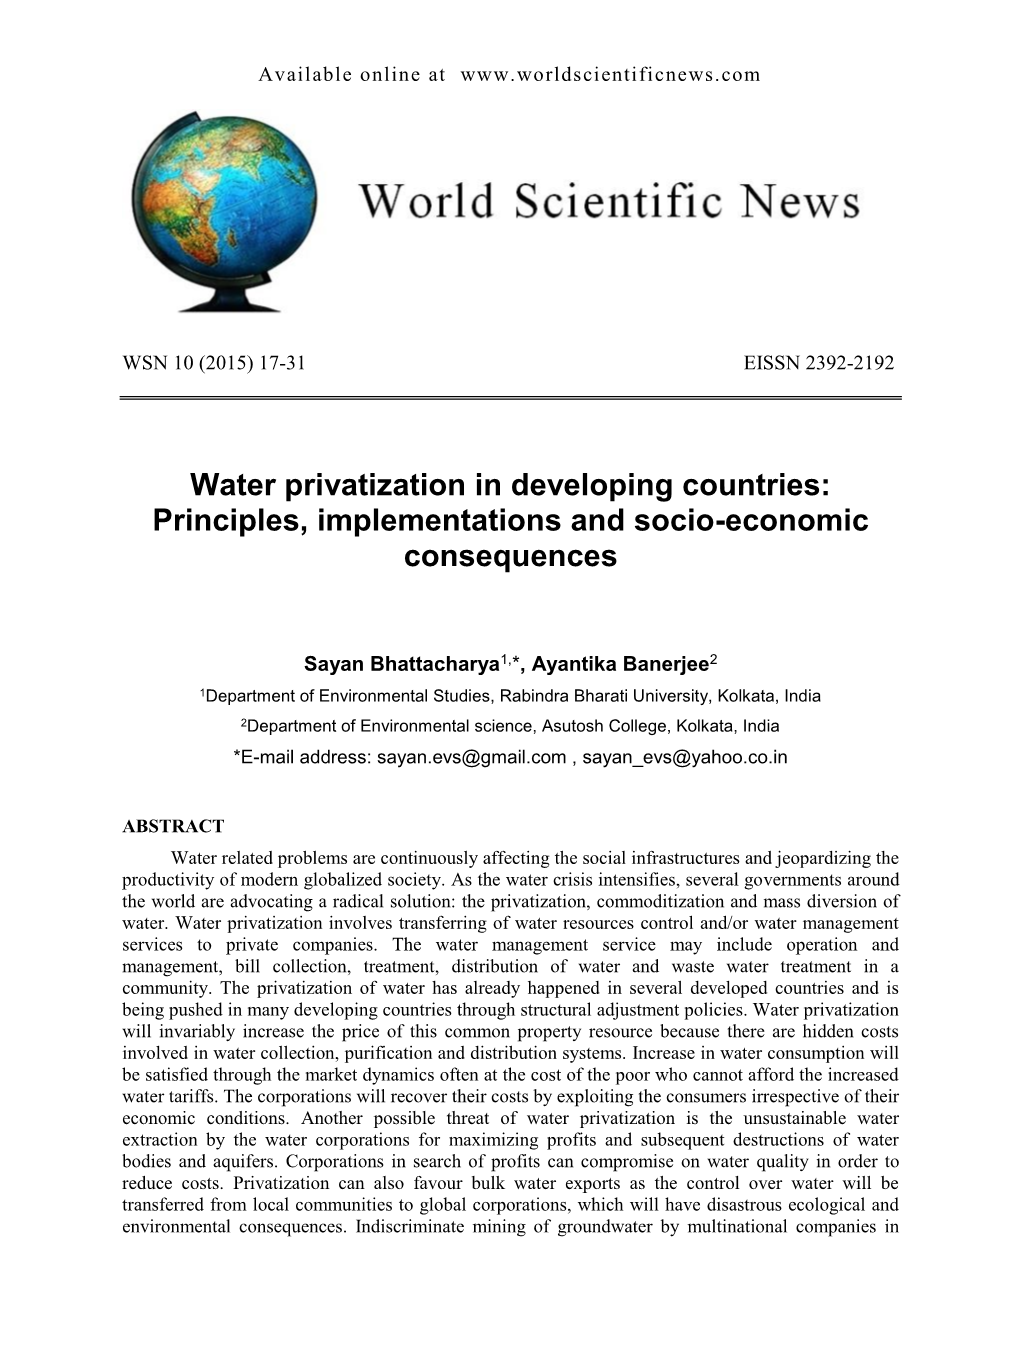 Water Privatization in Developing Countries: Principles, Implementations and Socio-Economic Consequences